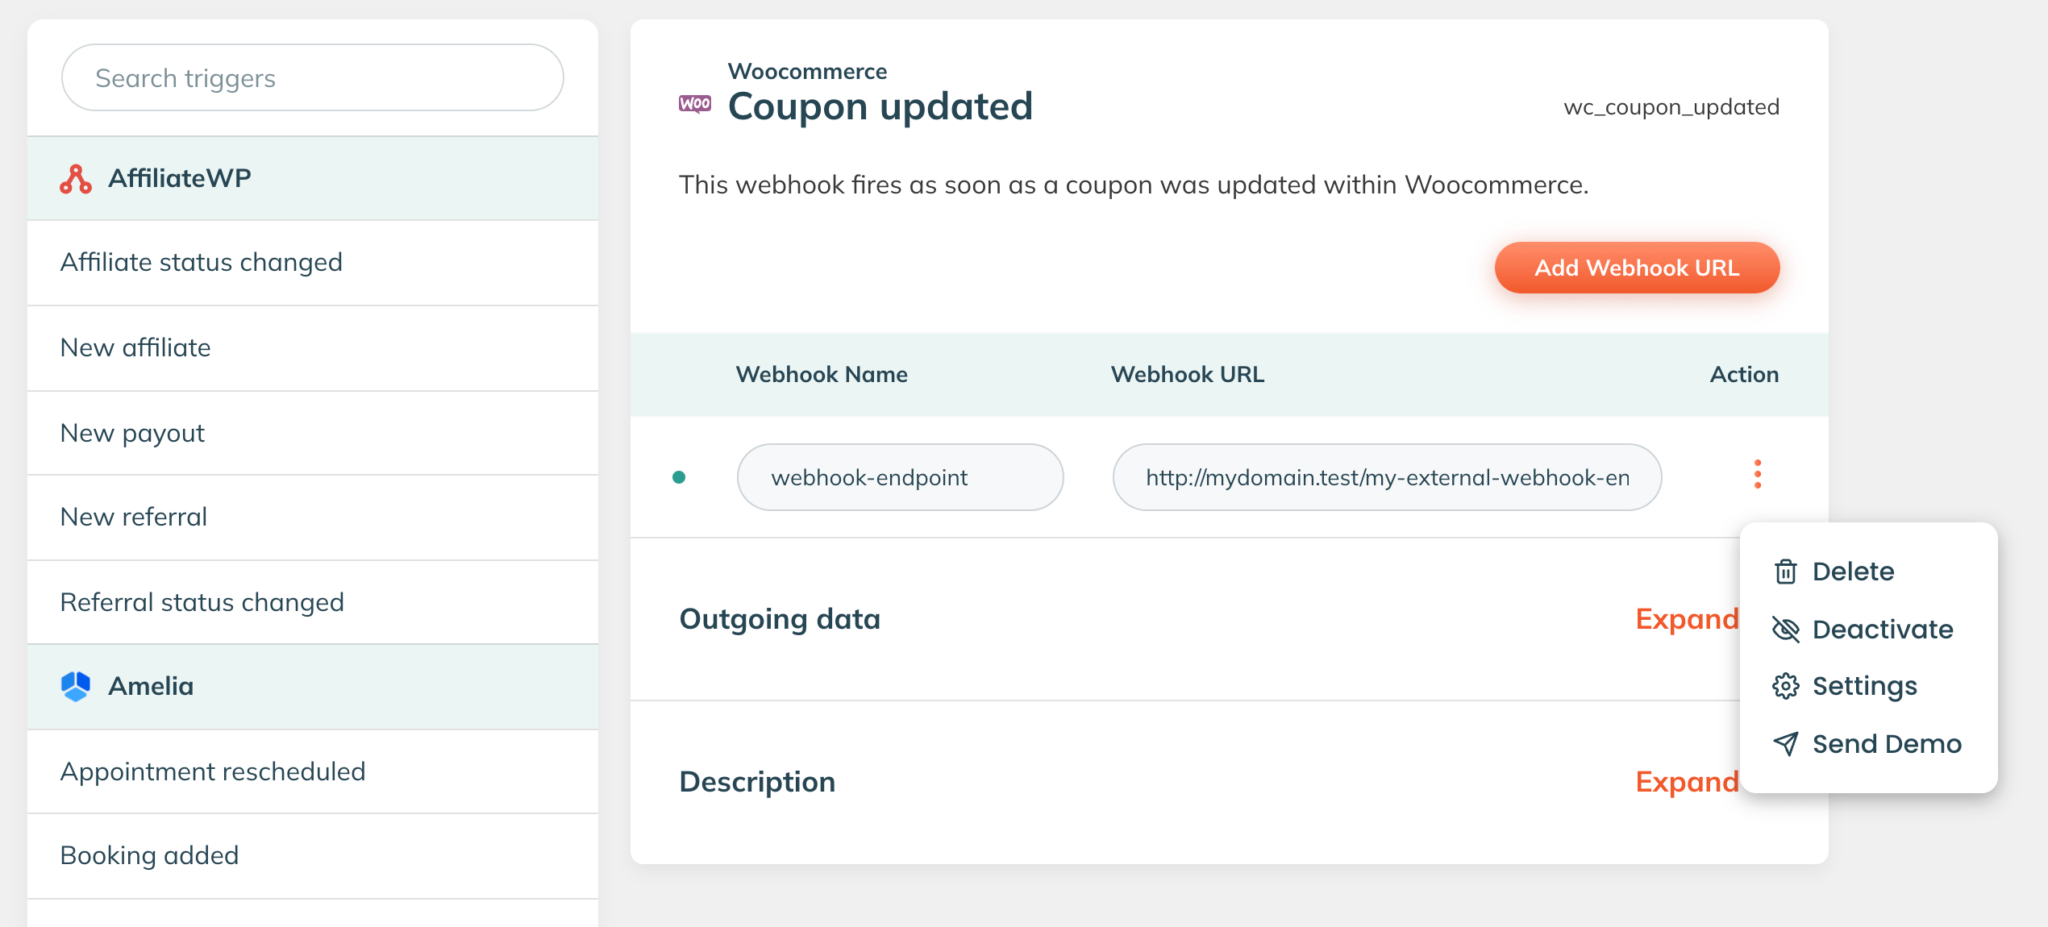 The WP Webhooks screen of the Company deleted trigger